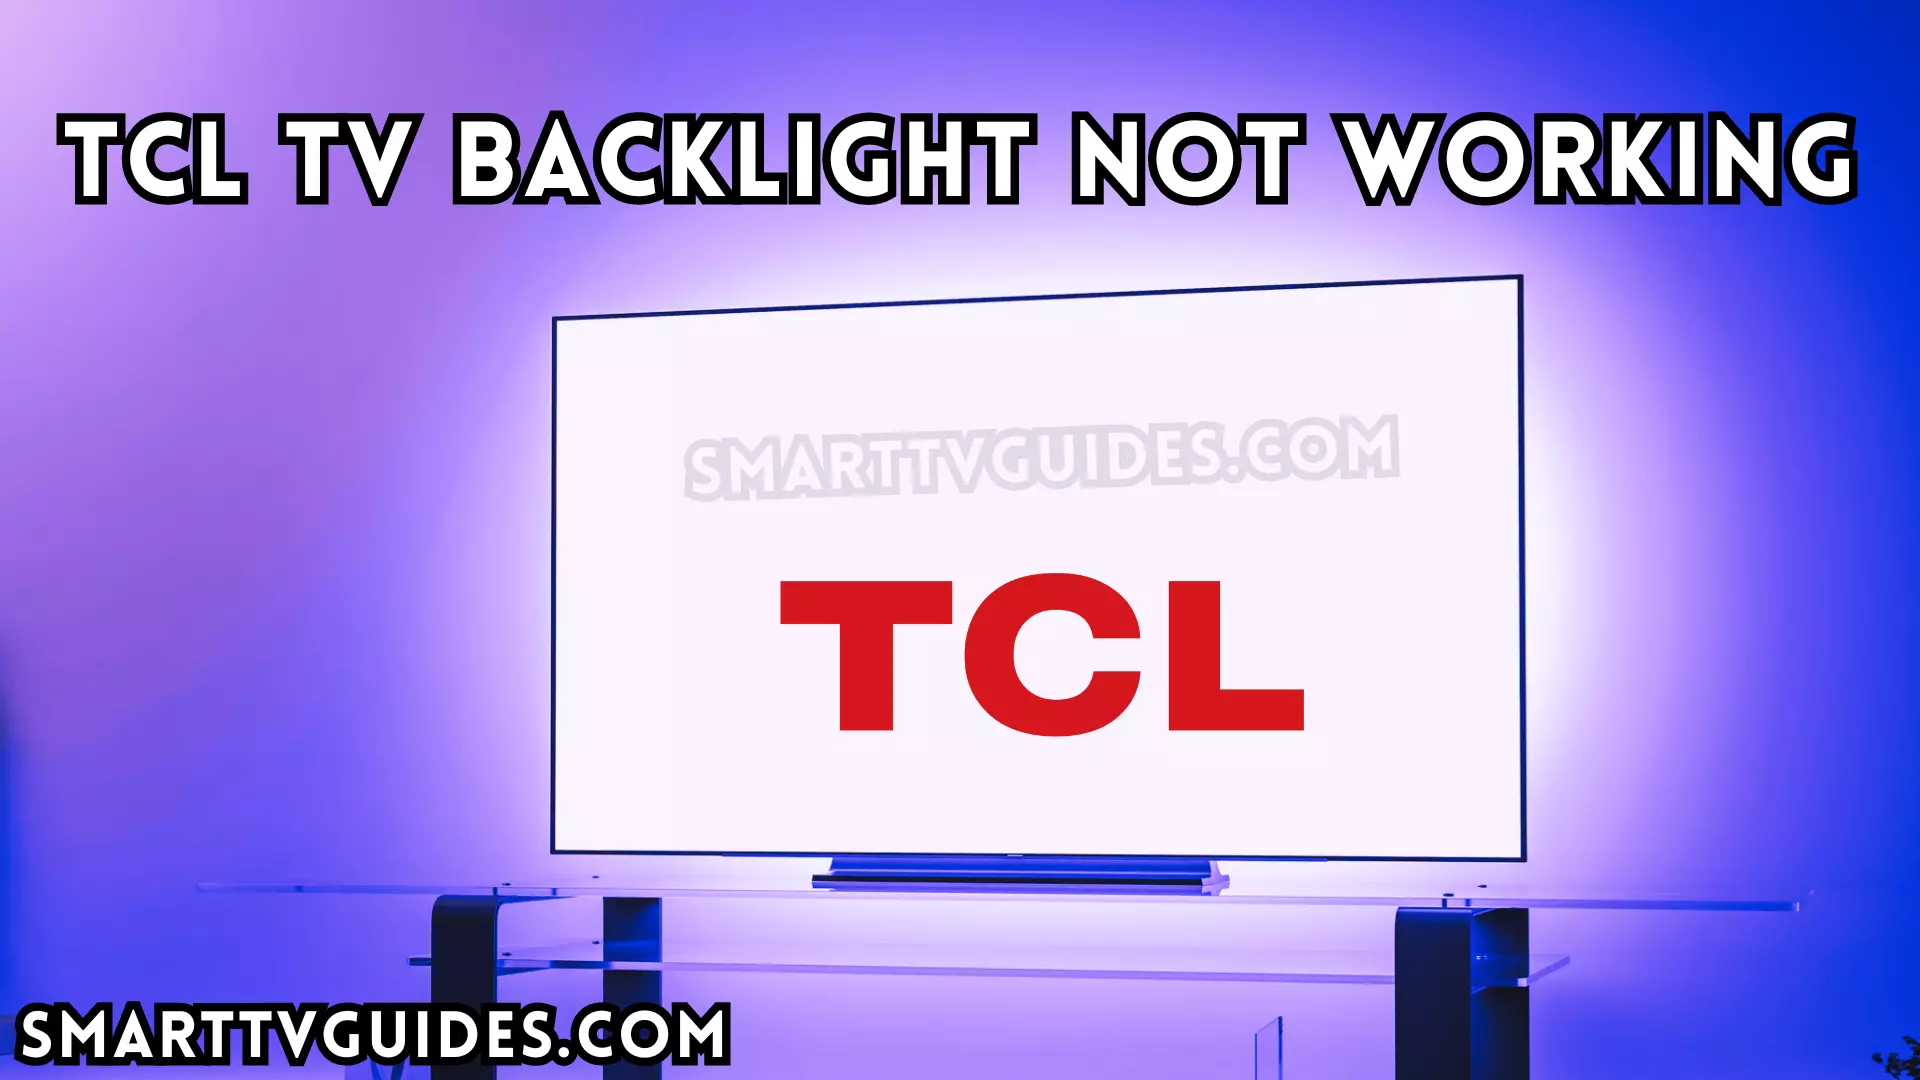 TCL TV Backlight Not Working